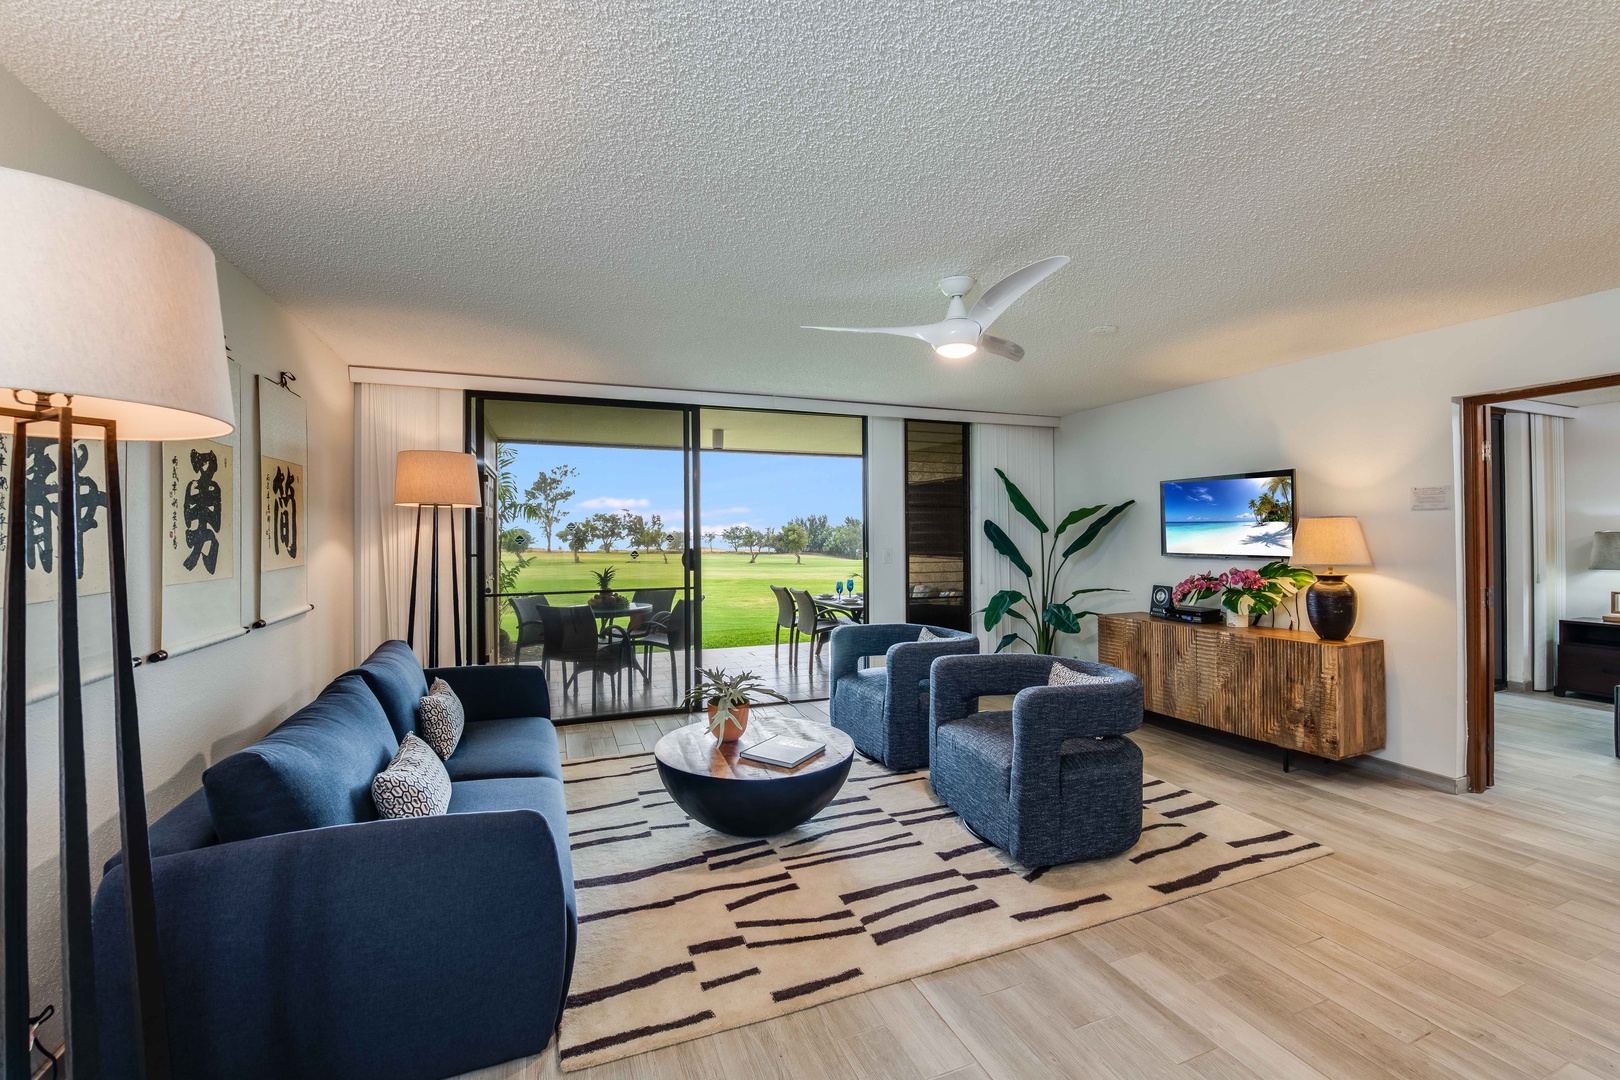 Waikoloa Vacation Rentals, Waikoloa Villas A107 - Beautiful Living Room Opens onto Your Private Terrace w/ Golf Course Frontage and Distant Ocean View